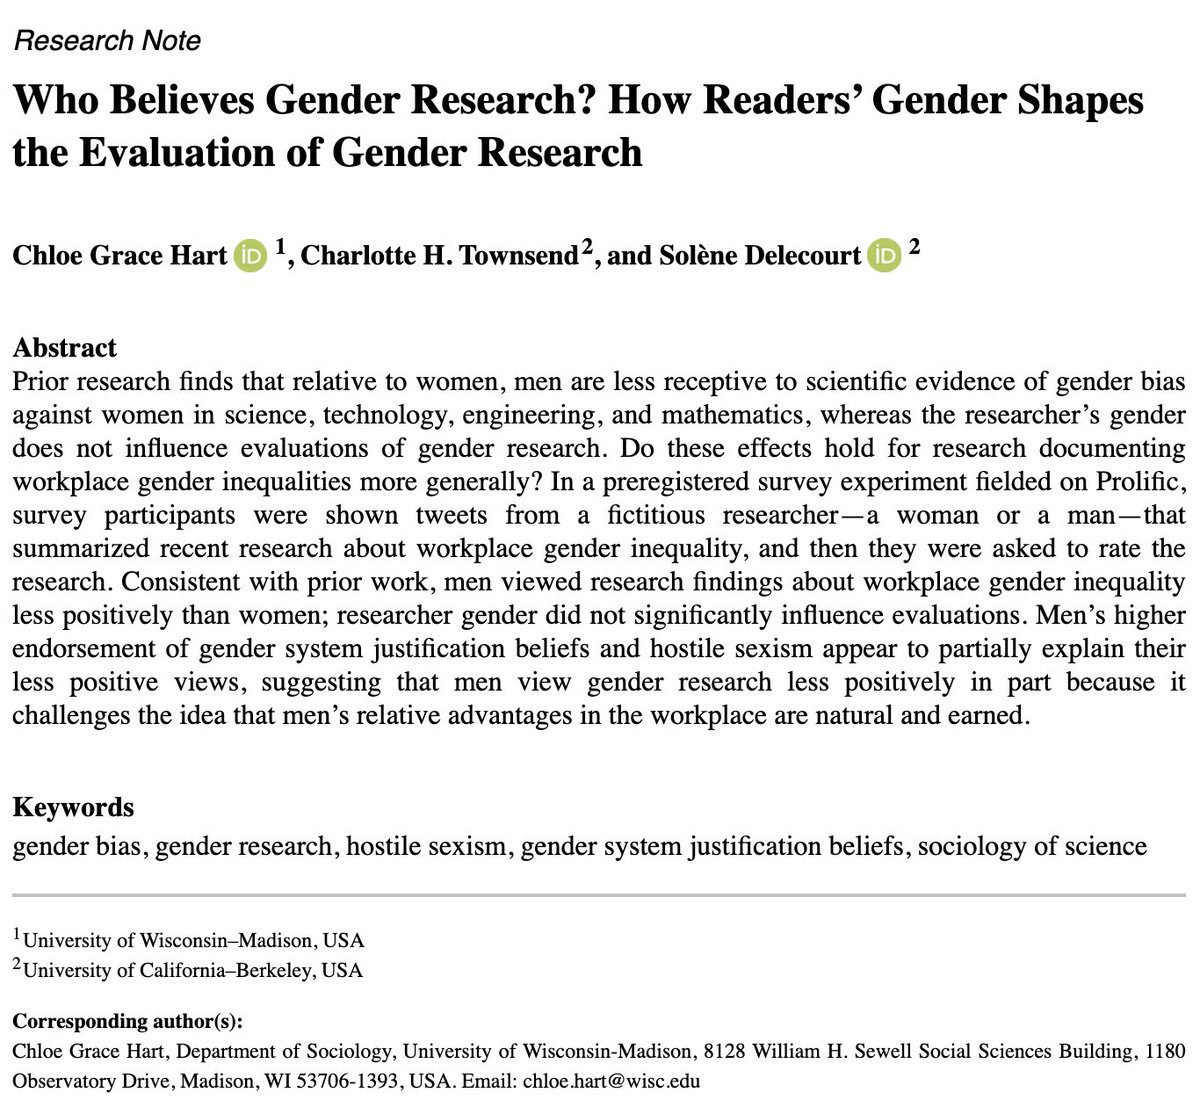 Check out our new OnlineFirst article! “Who Believes Gender Research? How Readers’ Gender Shapes the Evaluation of Gender Research” by Chloe Grace Hart, Charlotte H. Townsend, and Solène Delecourt in #SPQ! @ASASocPsych @ASASexandGender journals.sagepub.com/doi/10.1177/01…